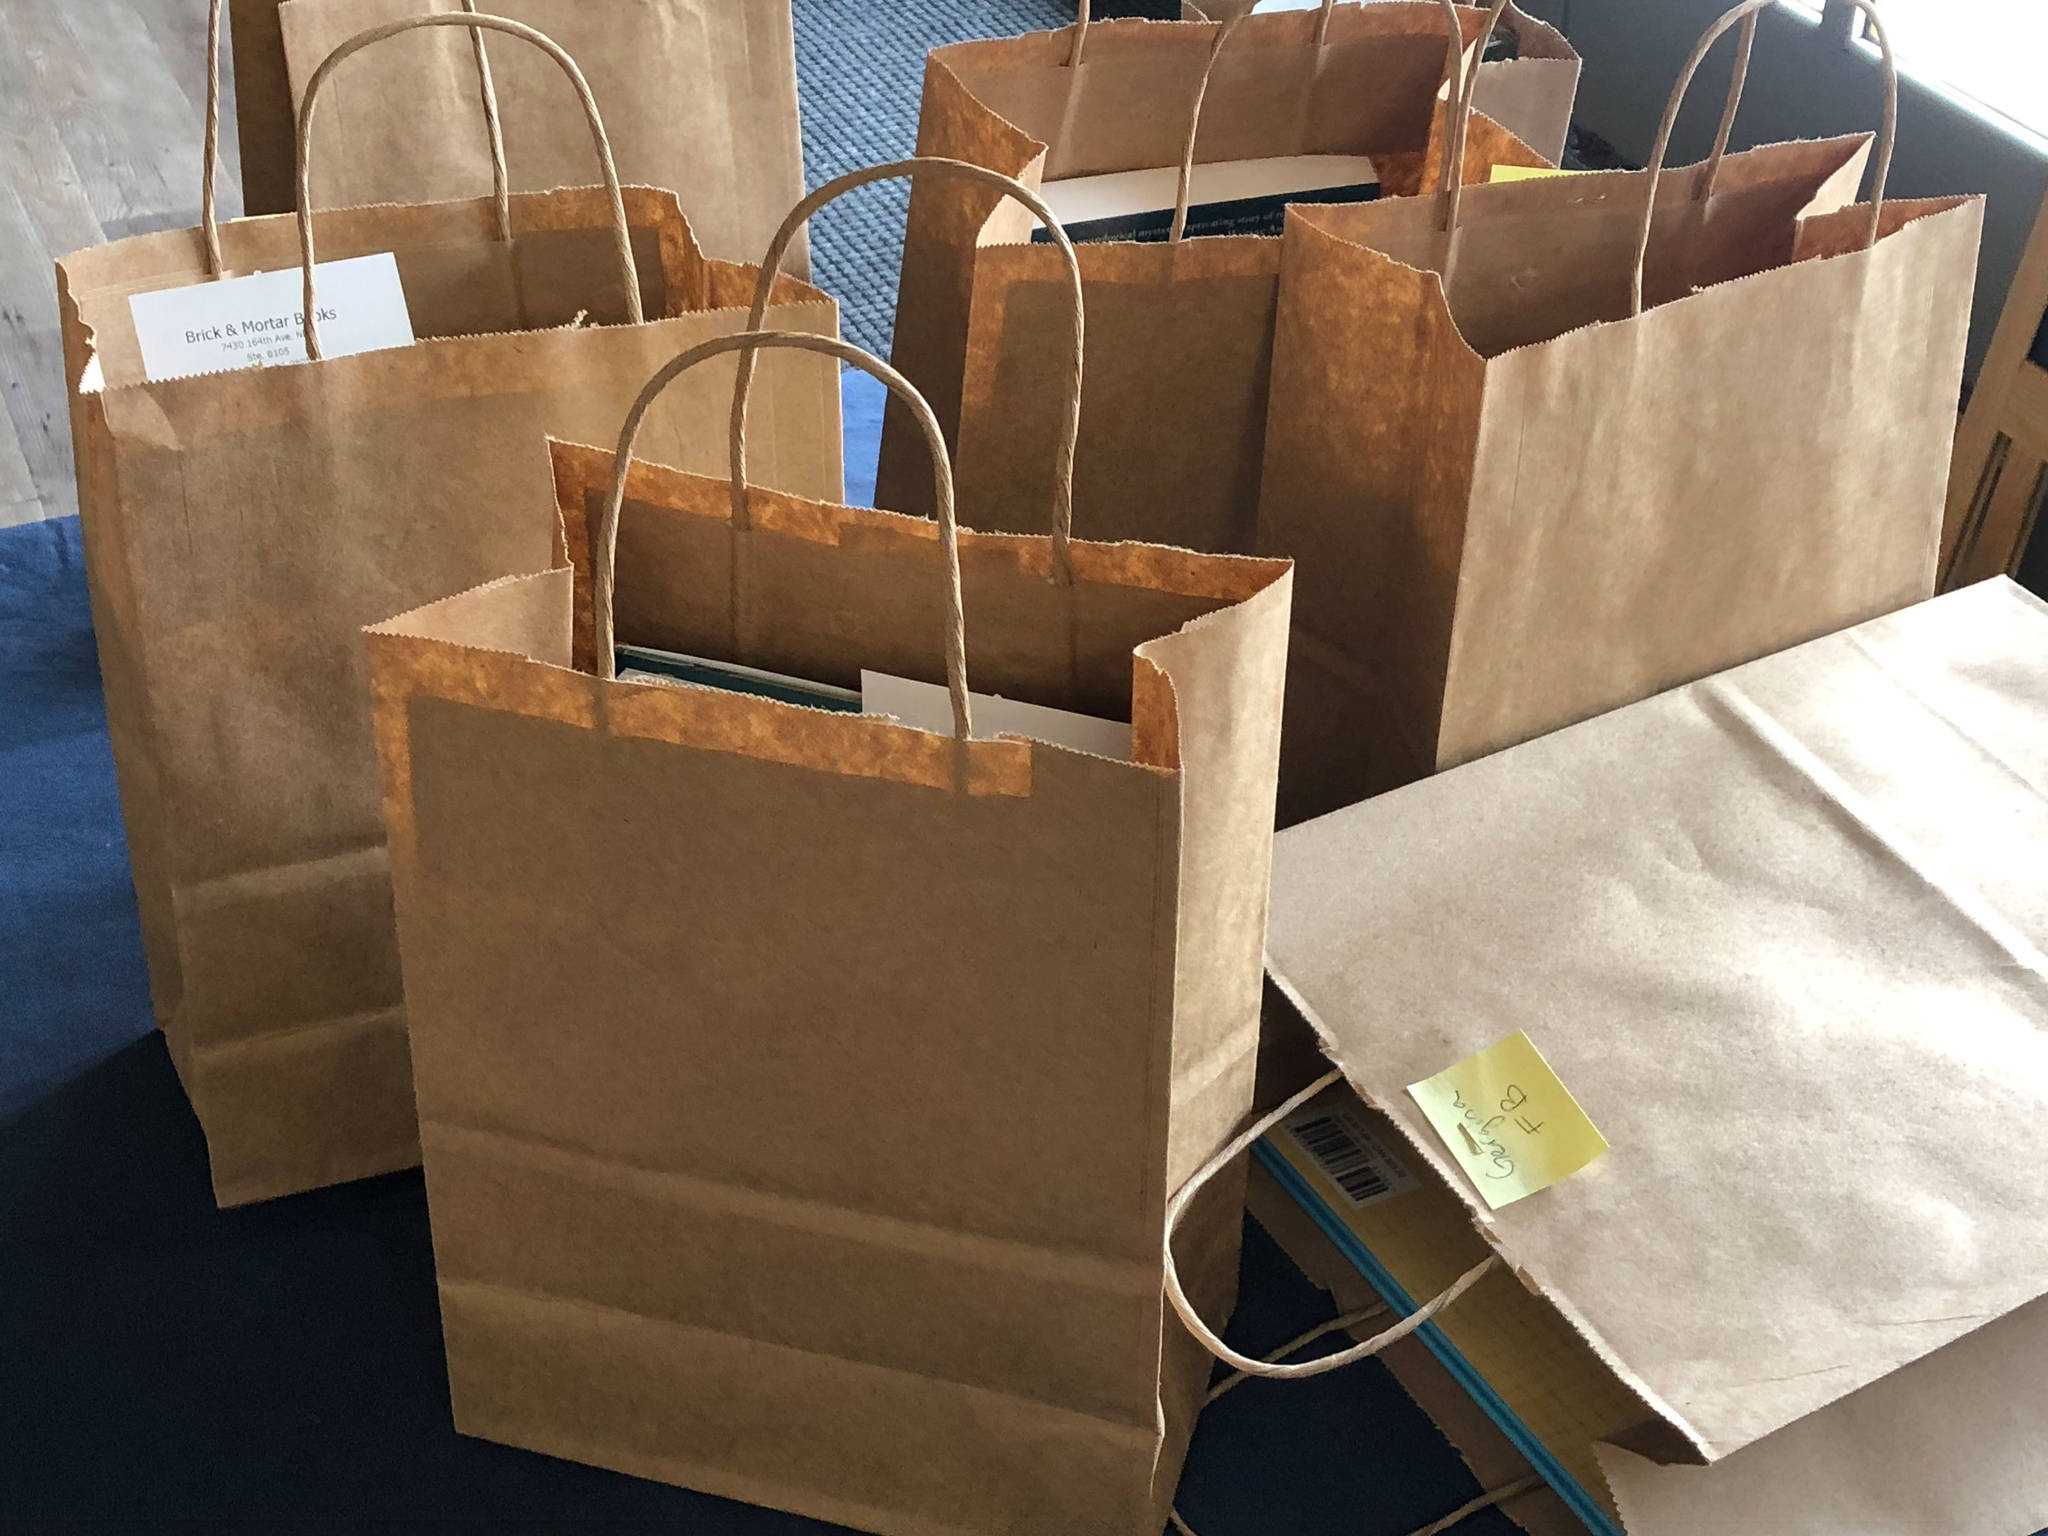 Bags await curbside delivery at Brick & Mortar Books in Redmond Town Center. Photo courtesy of Brick & Mortar Books